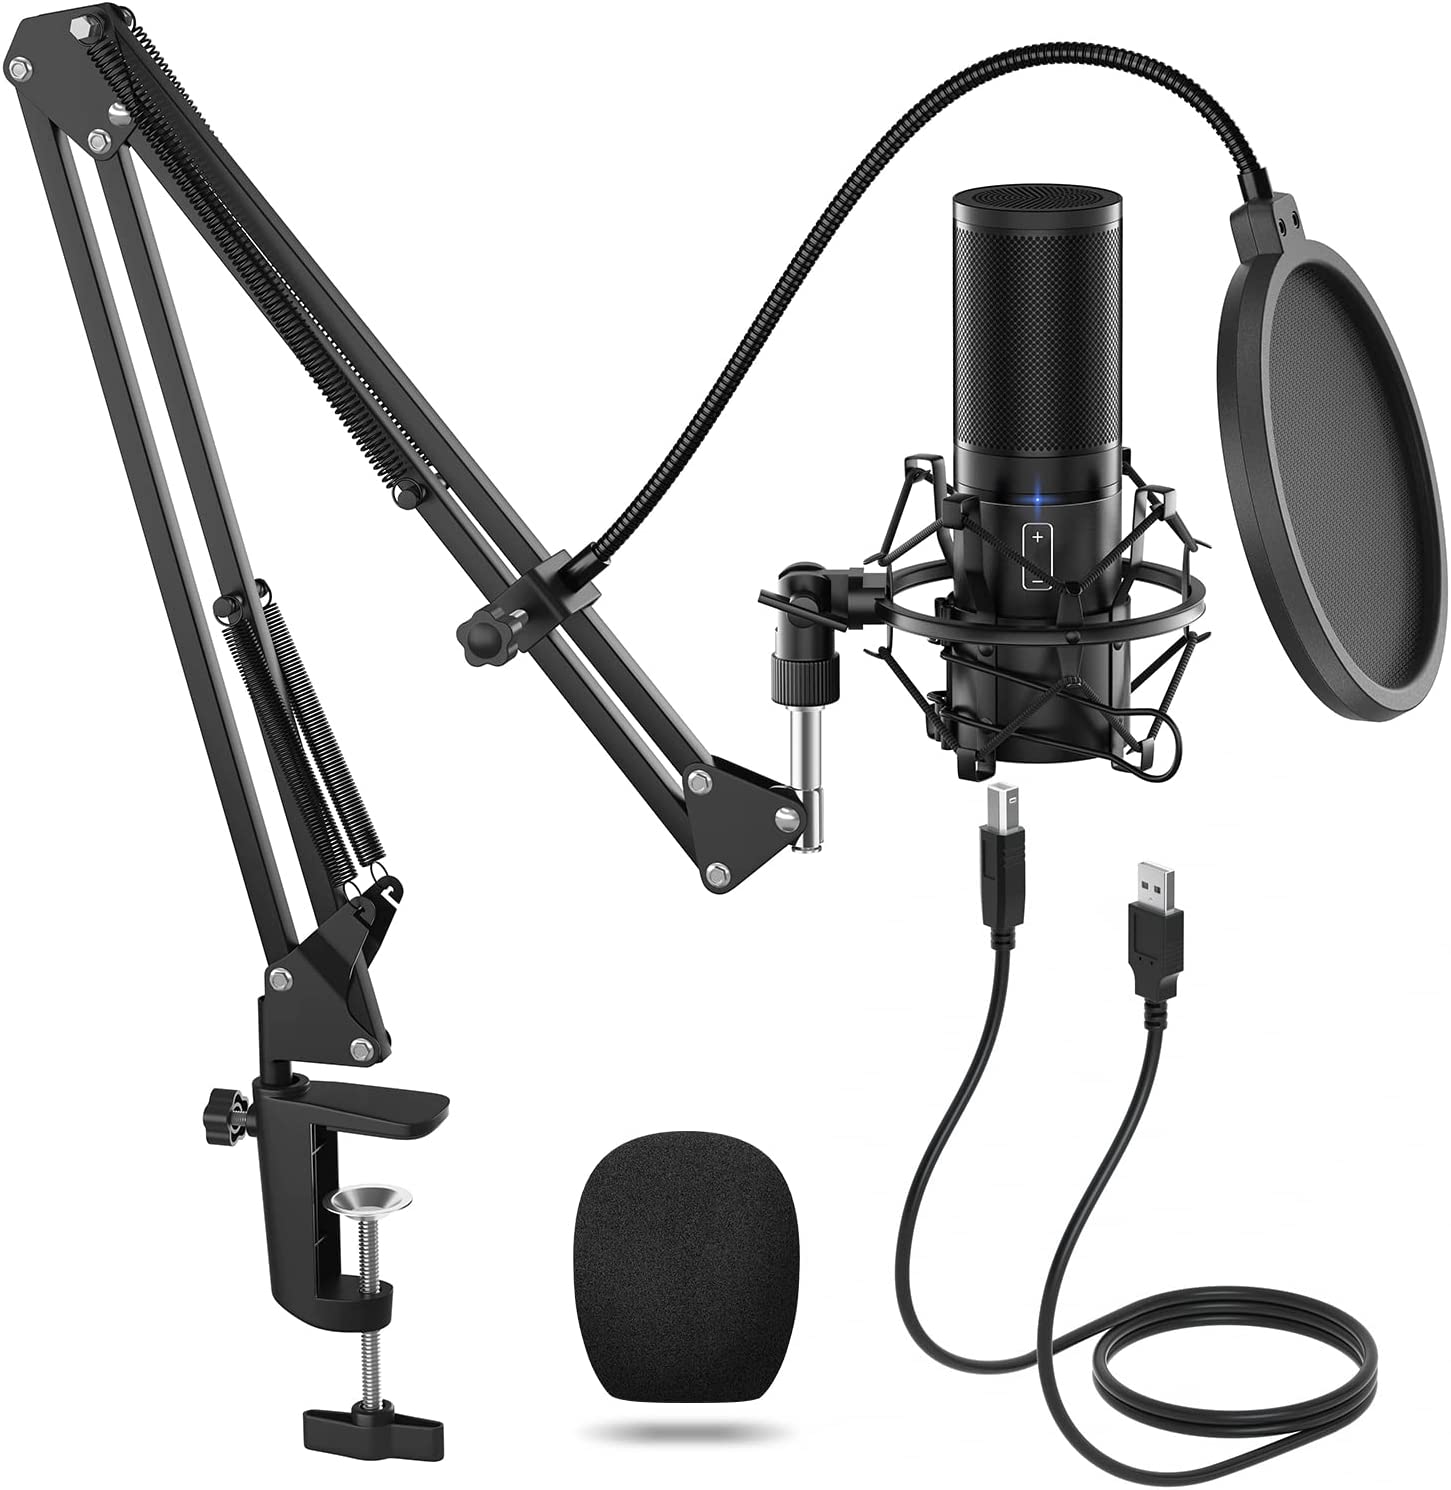 TONOR USB Computer Gaming Microphone, Condenser Microphone with Noise Cance 